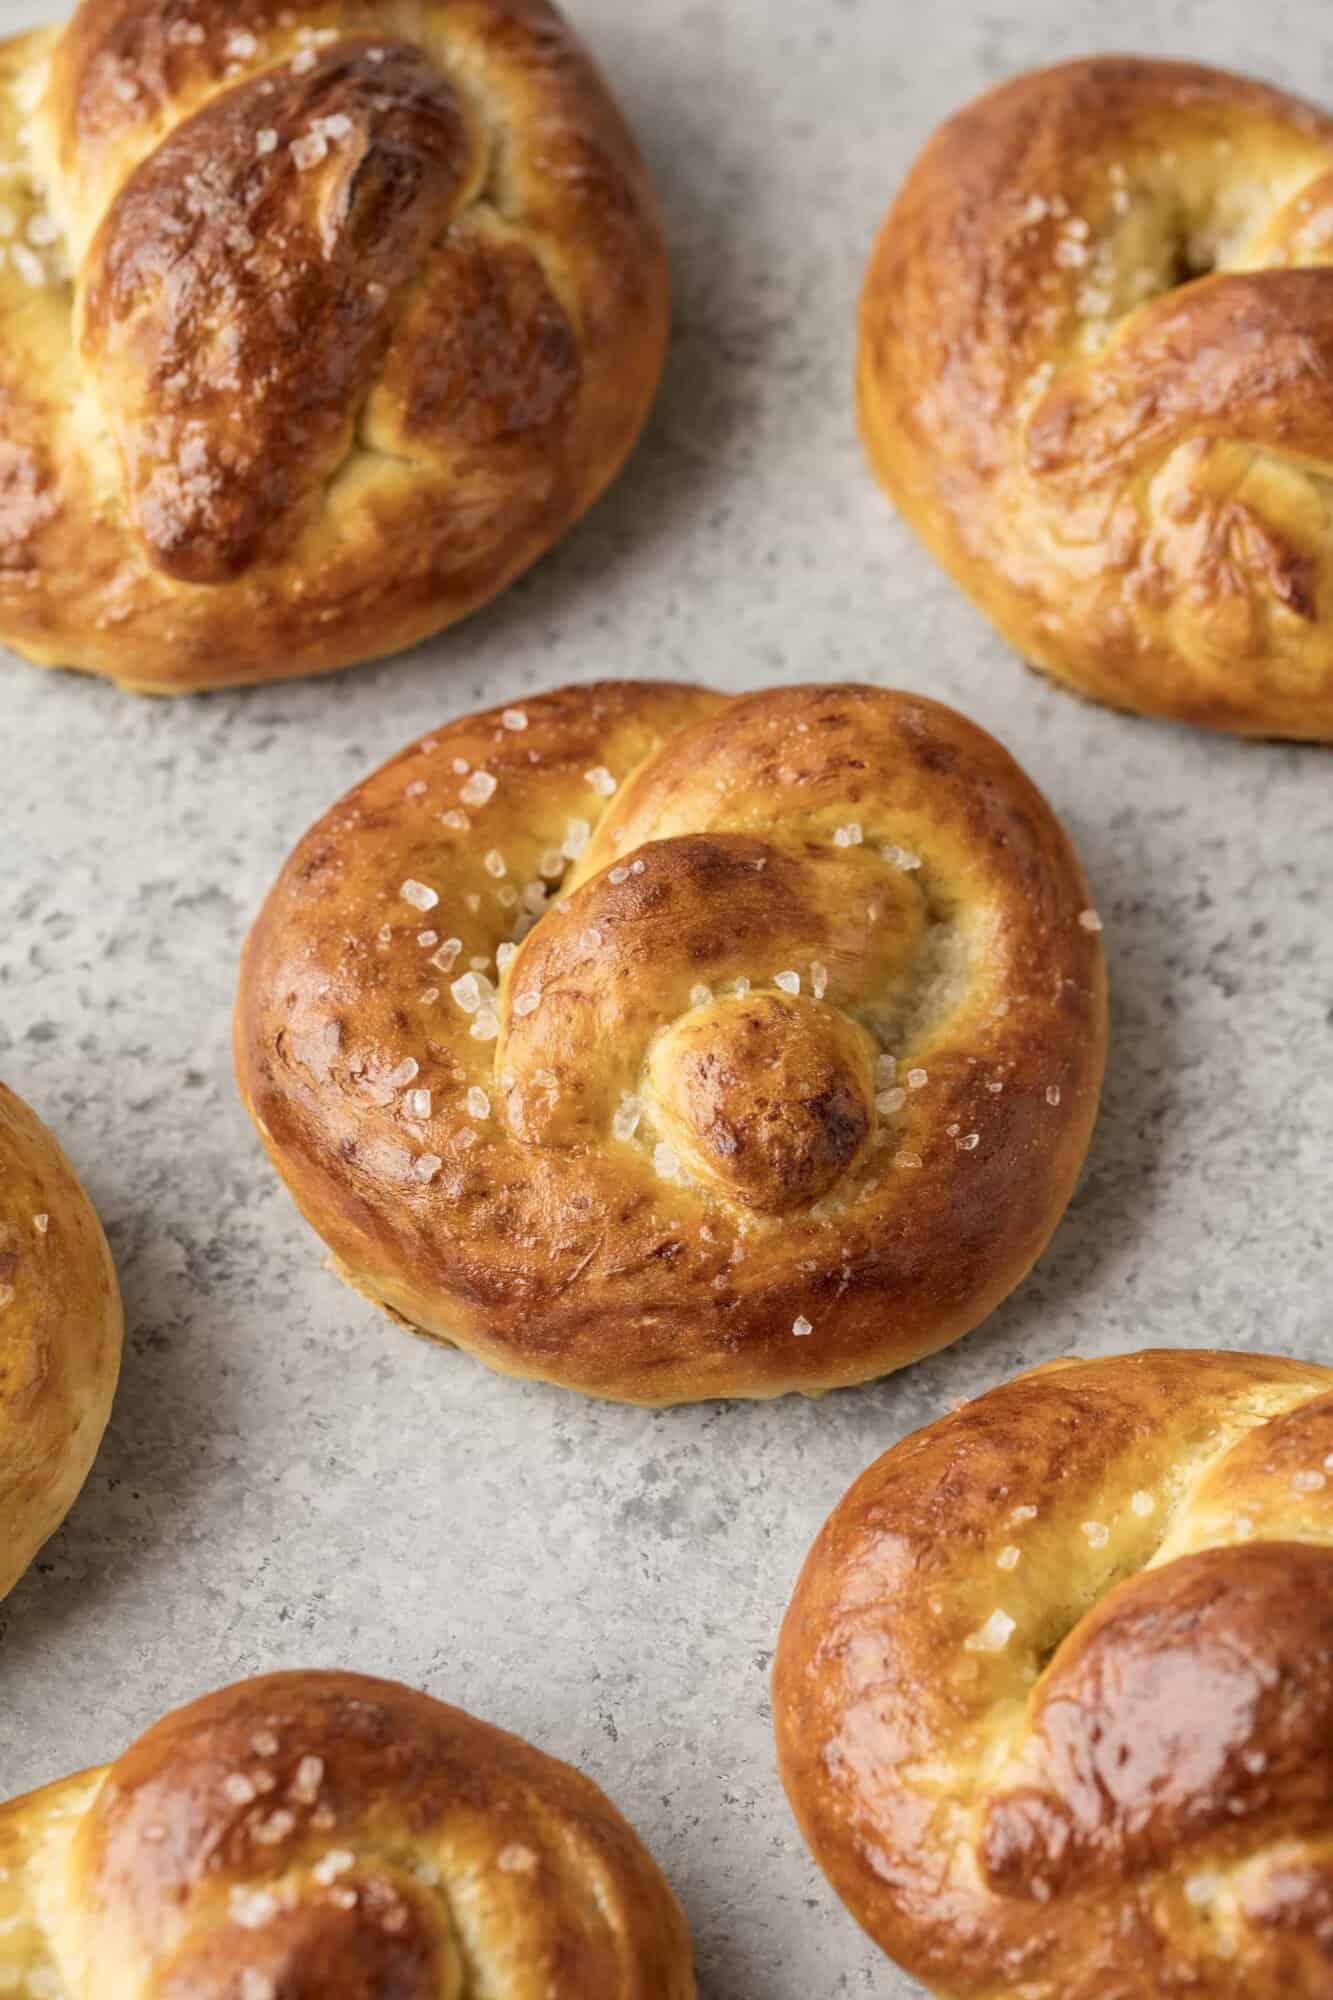 Learn how to make The Best Homemade Soft Pretzels complete with a visual demonstration. Just a few simple ingredients is all you need and it's so easy the kids can get in on the action too!